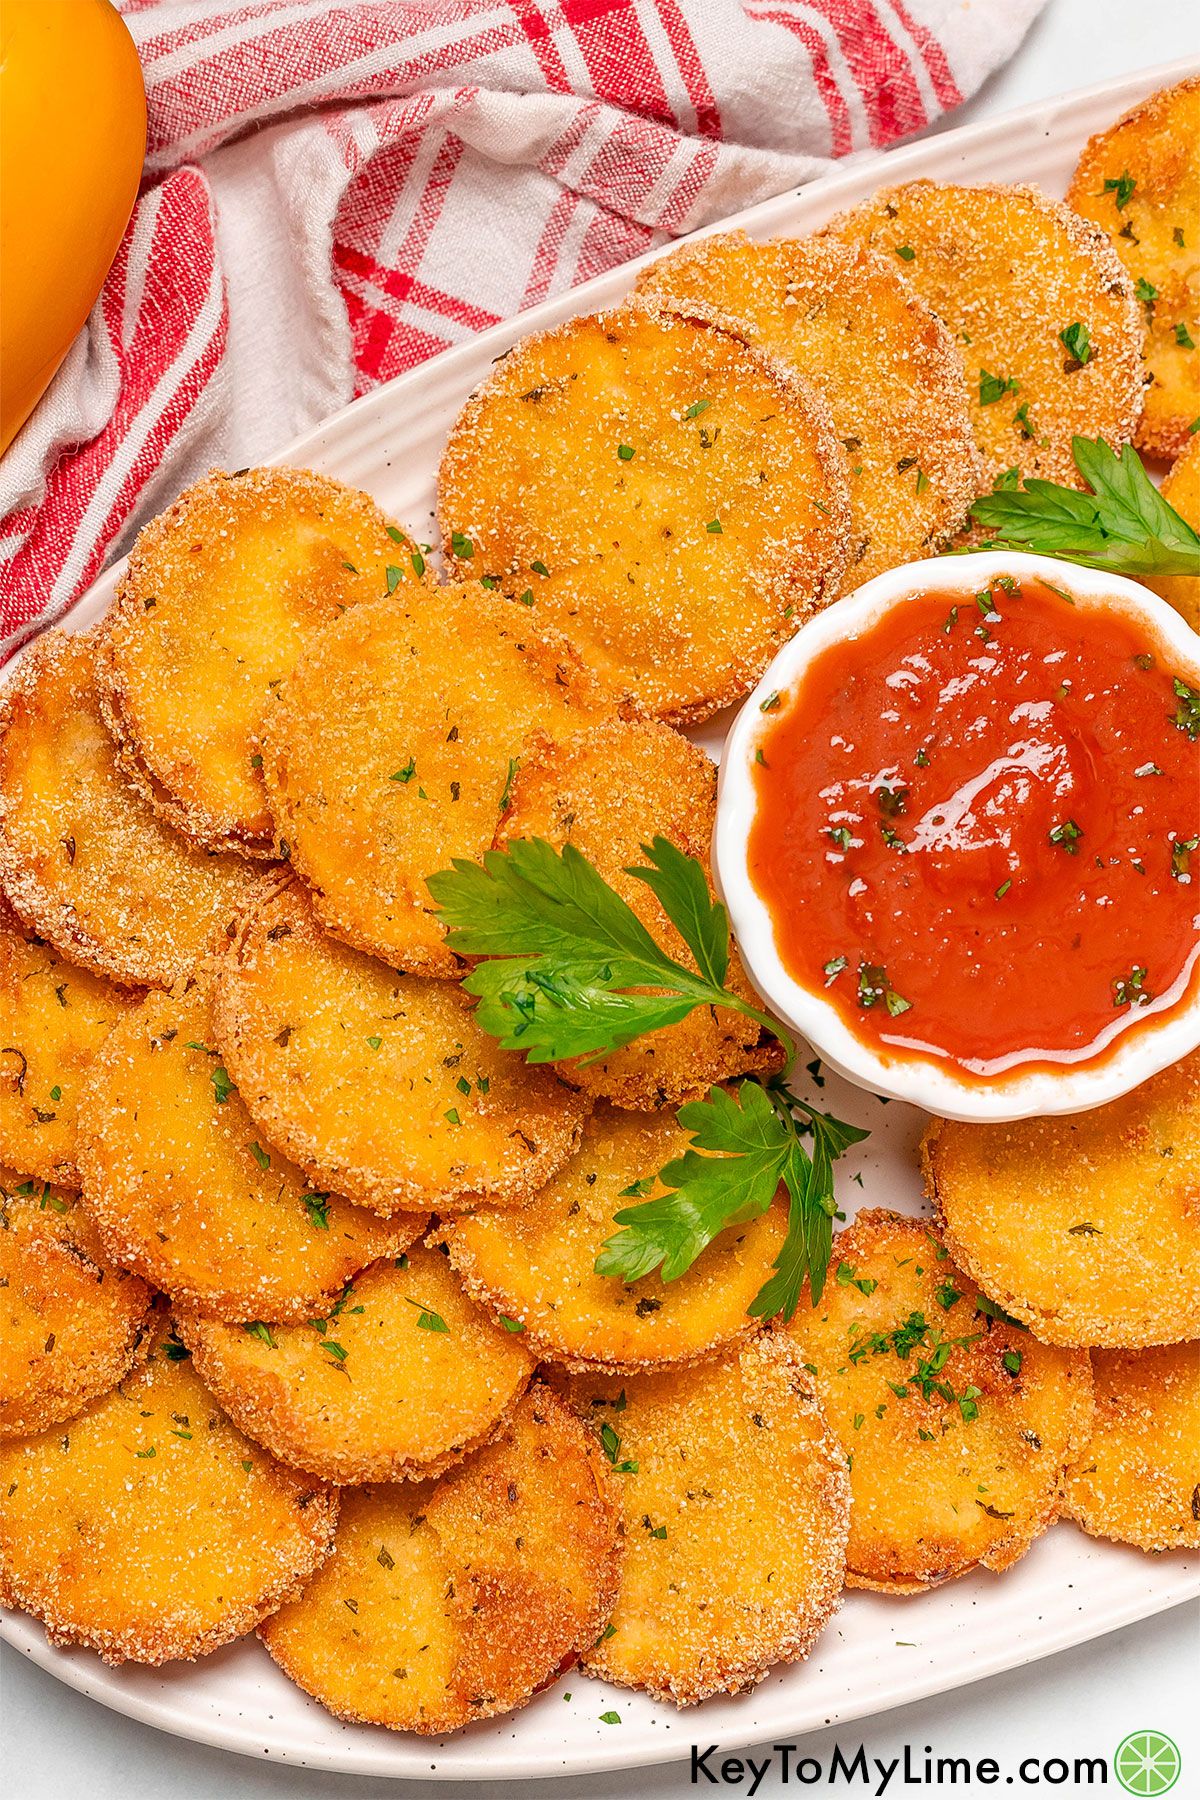 An overhead image of plate full of freshly made fried squash with a side of Marinara sauce.